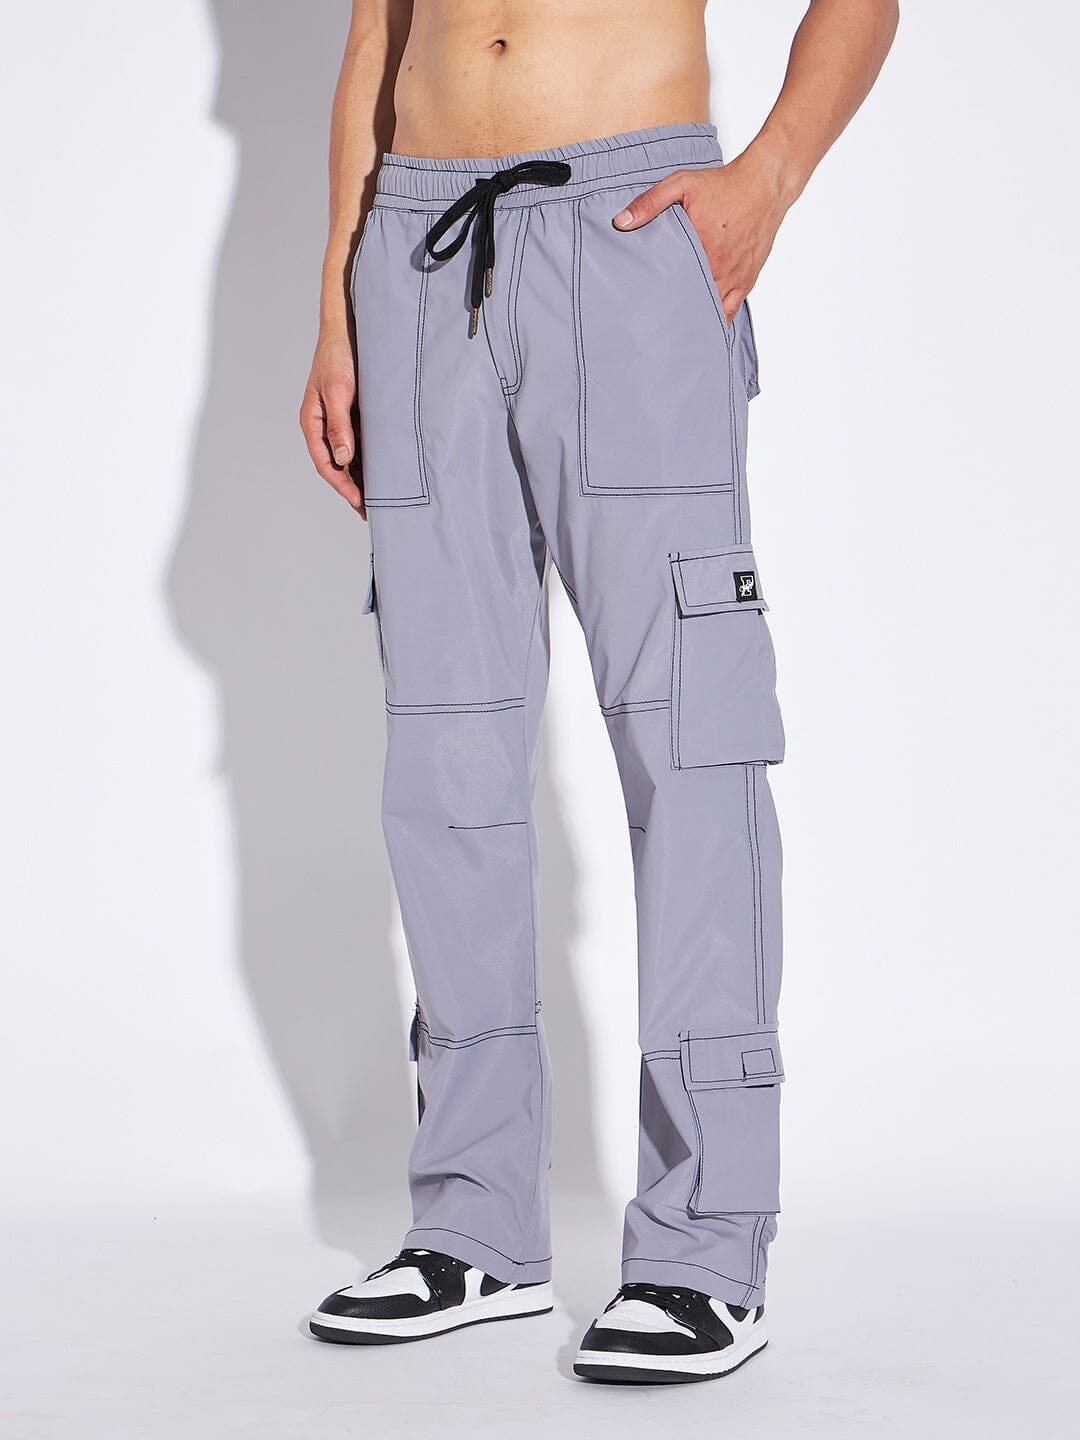 Purple Cargo Joggers With Pockets For Men Streetwear Hip Hop Cargo Track  Pants Mens With Korean Fashion 211006 From Cong02, $11.51 | DHgate.Com